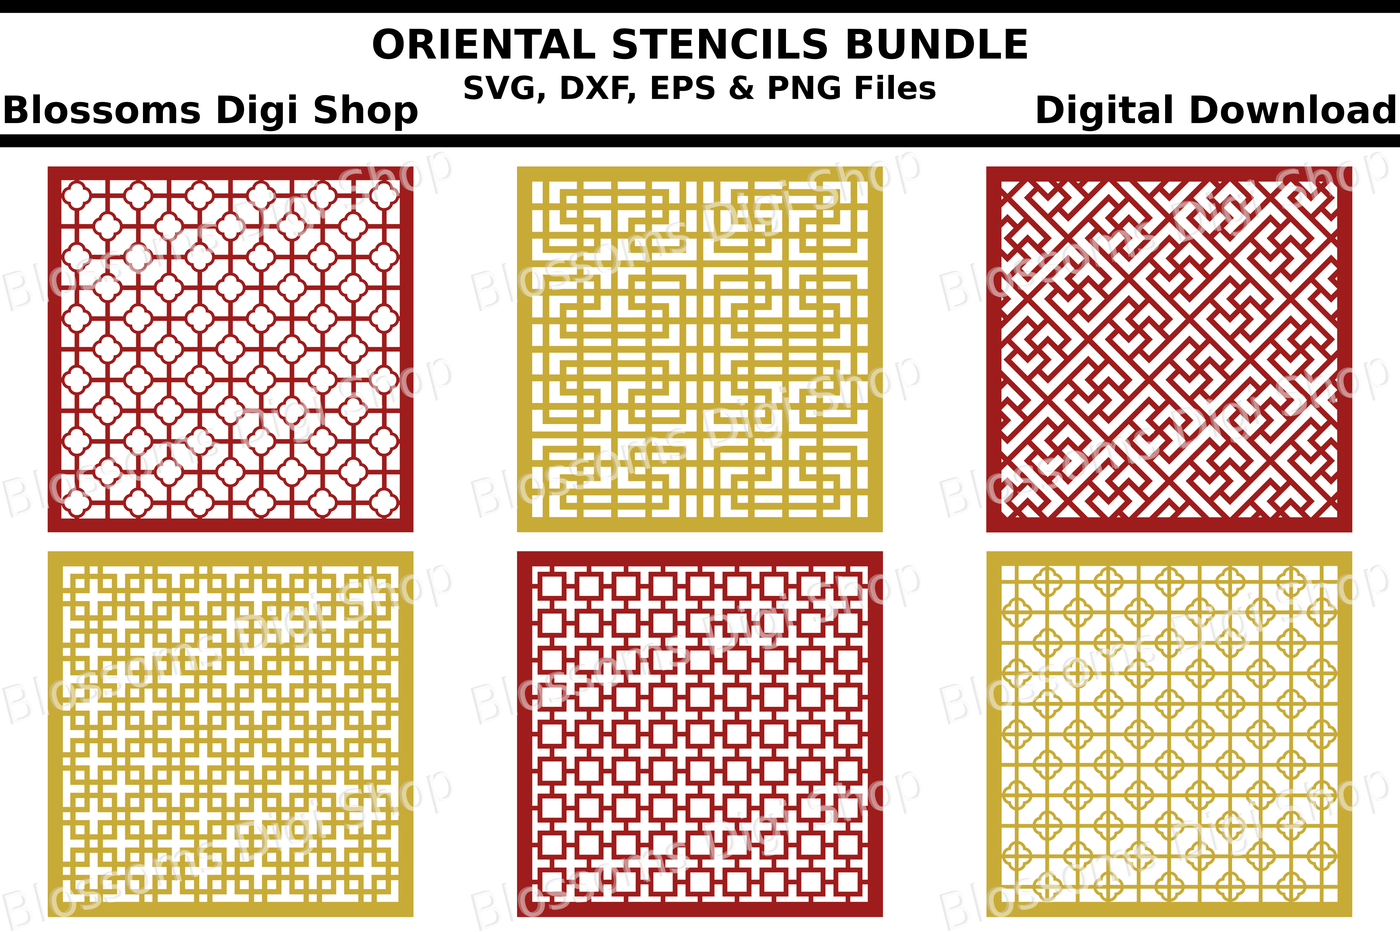 Download Oriental Patterns Stencil Bundle Svg Dxf Eps And Png Files By Blossoms Digi Shop Thehungryjpeg Com